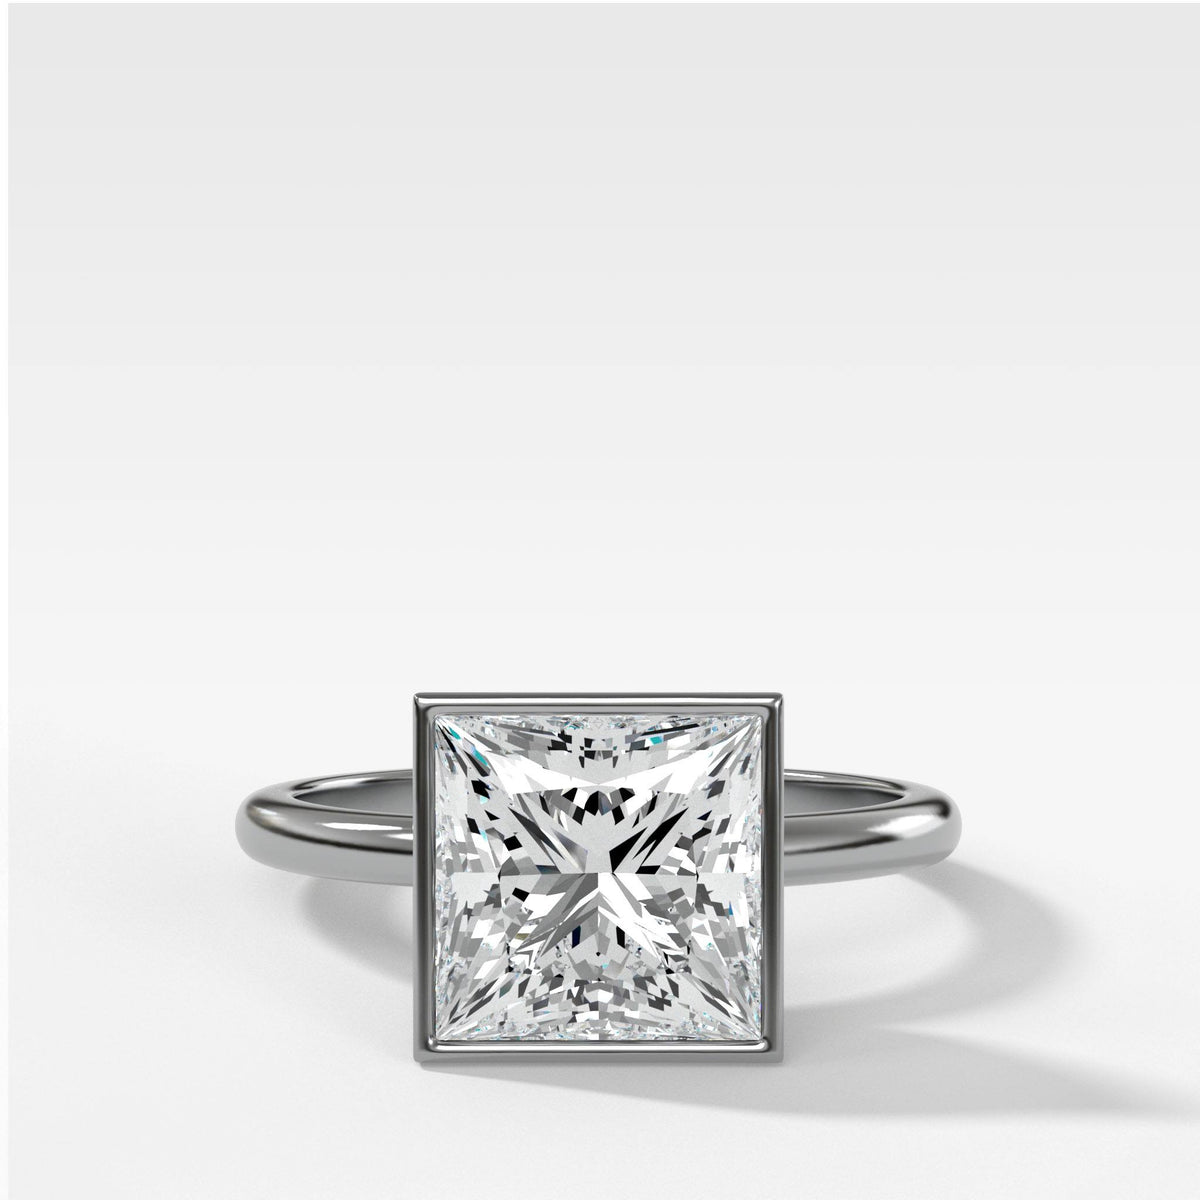 Bezel Penumbra Solitaire With Princess by Good Stone in White Gold